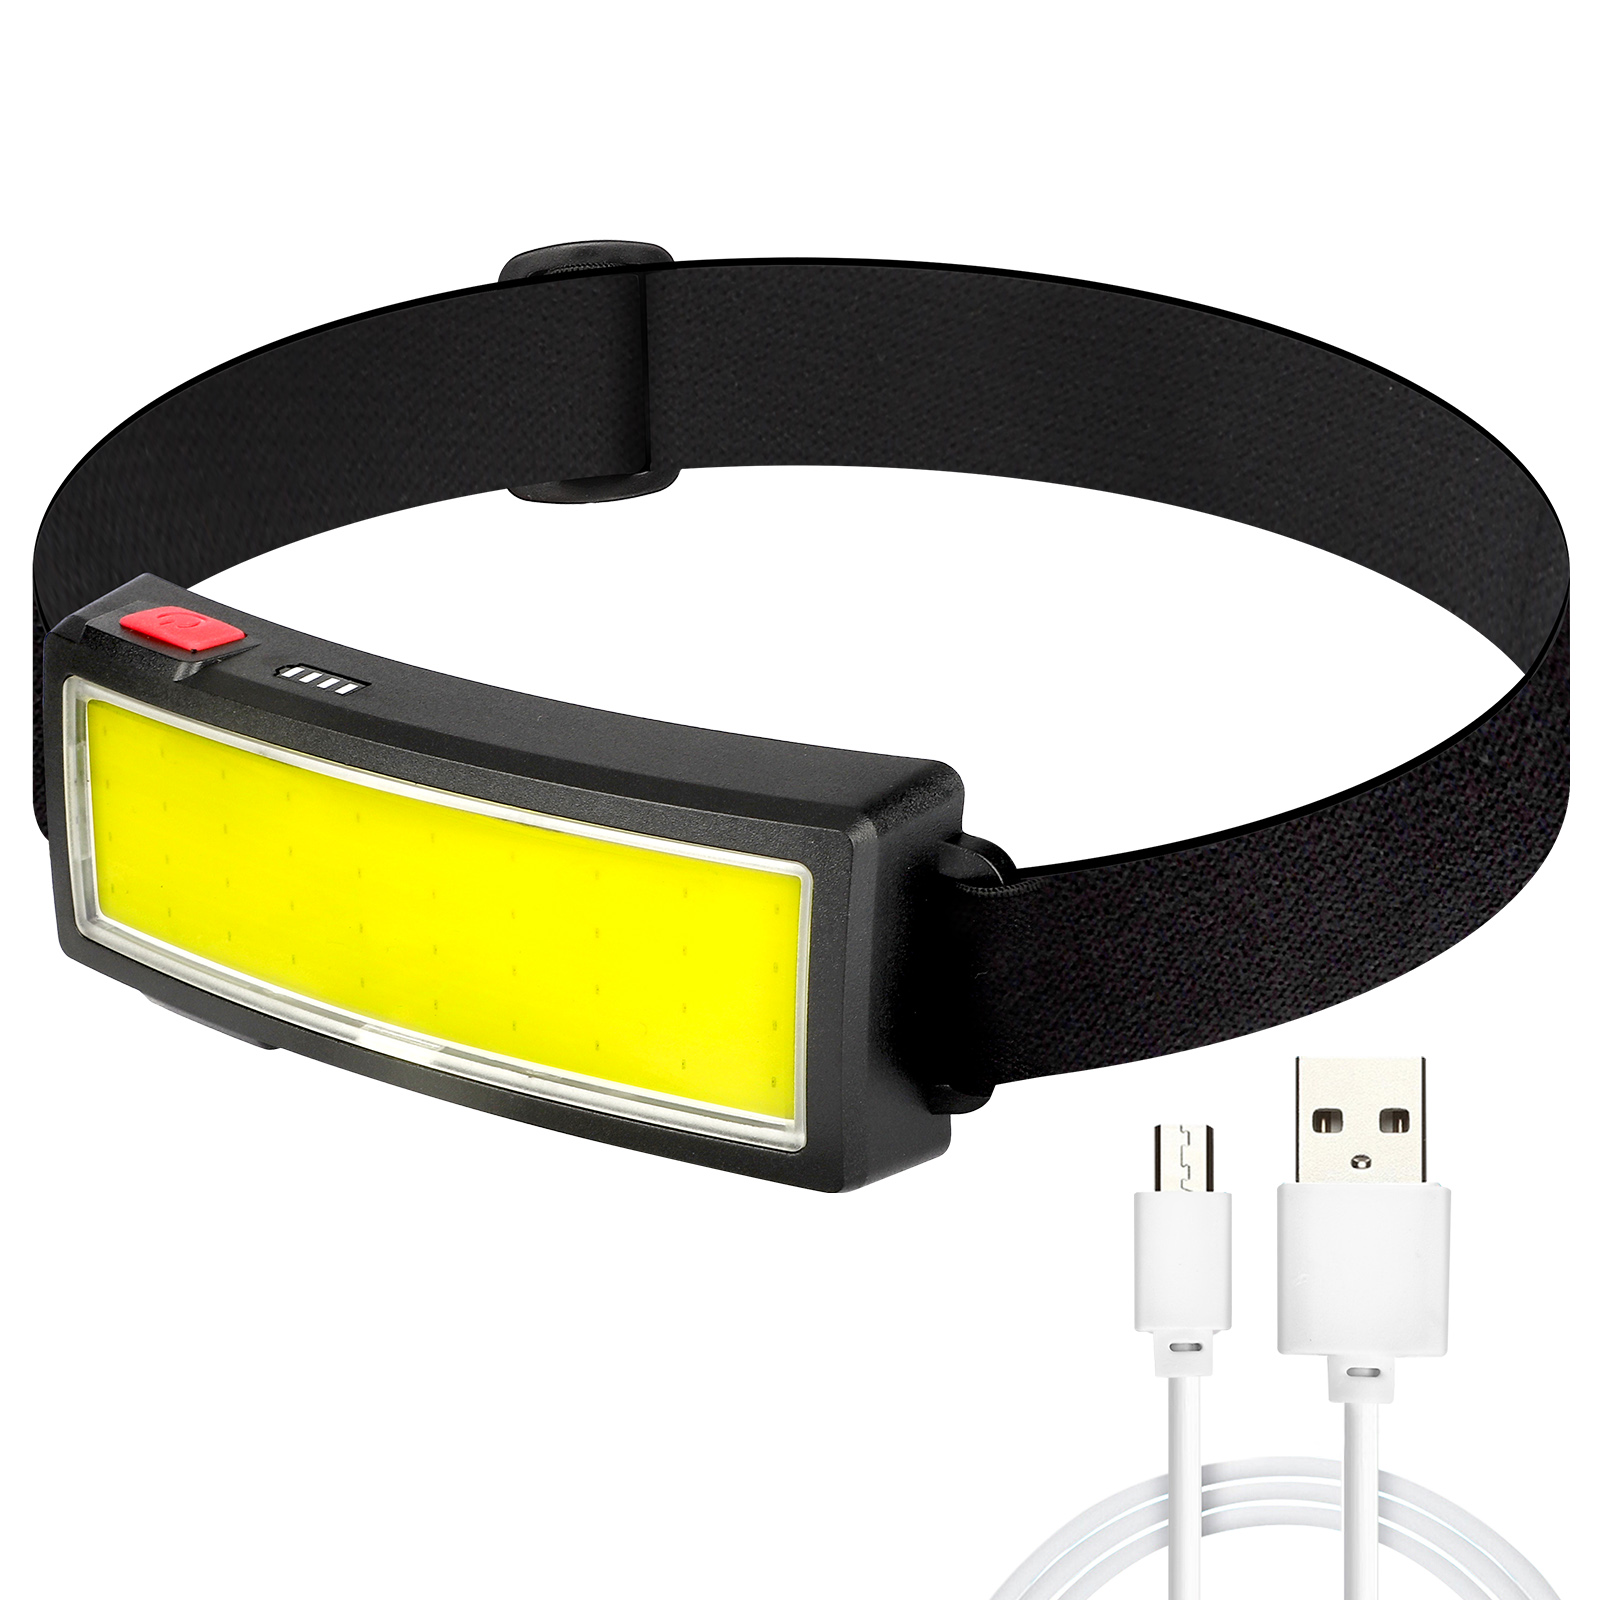 Details about  / Waterproof Headlight Head Torch Super Bright LED USB Rechargeable Headlamp Fish